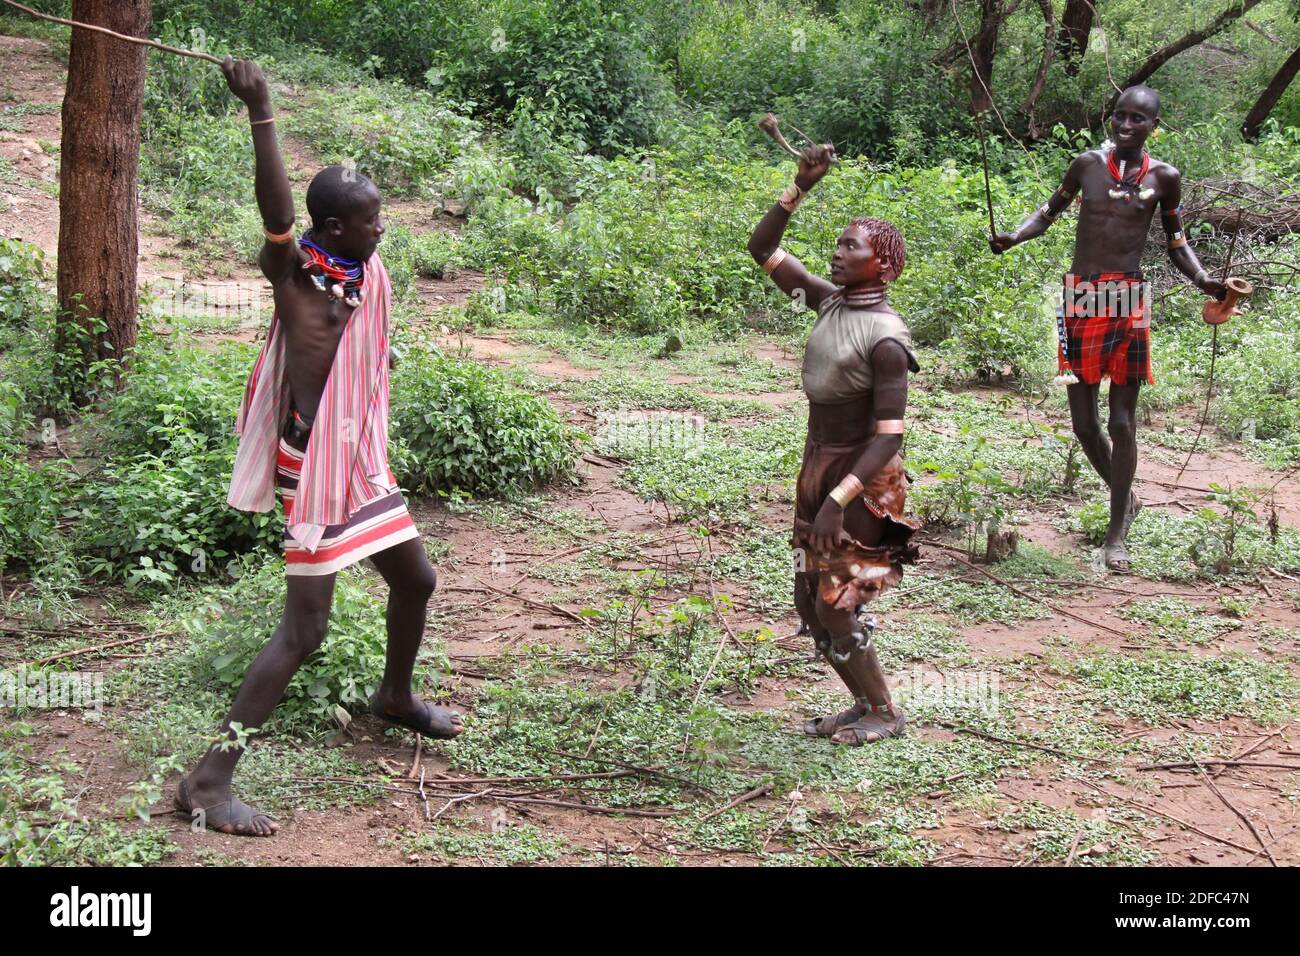 A Hamar Tribesman Whipping Young Hamar Women. The Young Women Ask To be  Whipped To Show Love For A, Stock Photo, Picture And Rights Managed  Image. Pic. YB3-3028776